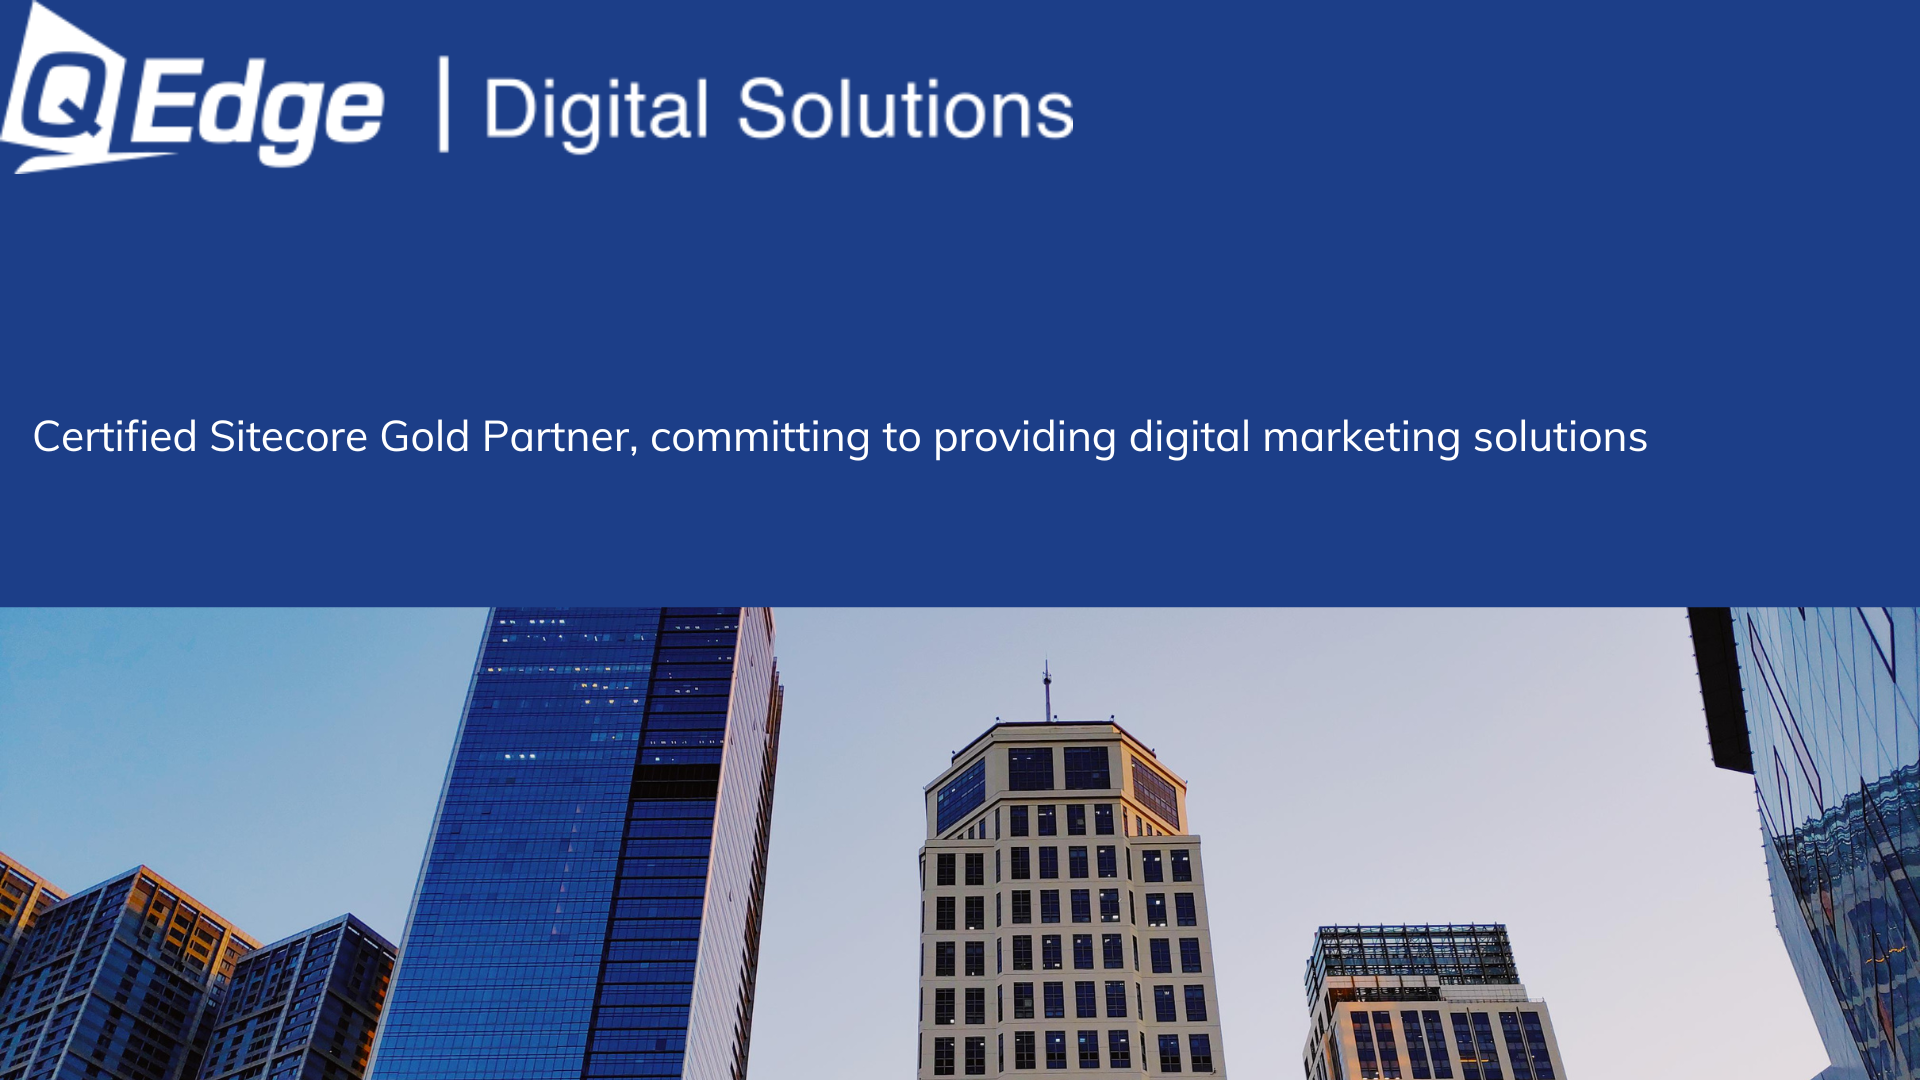 [2023]QEdge Digital Solutions|Your One-Stop Service Provider